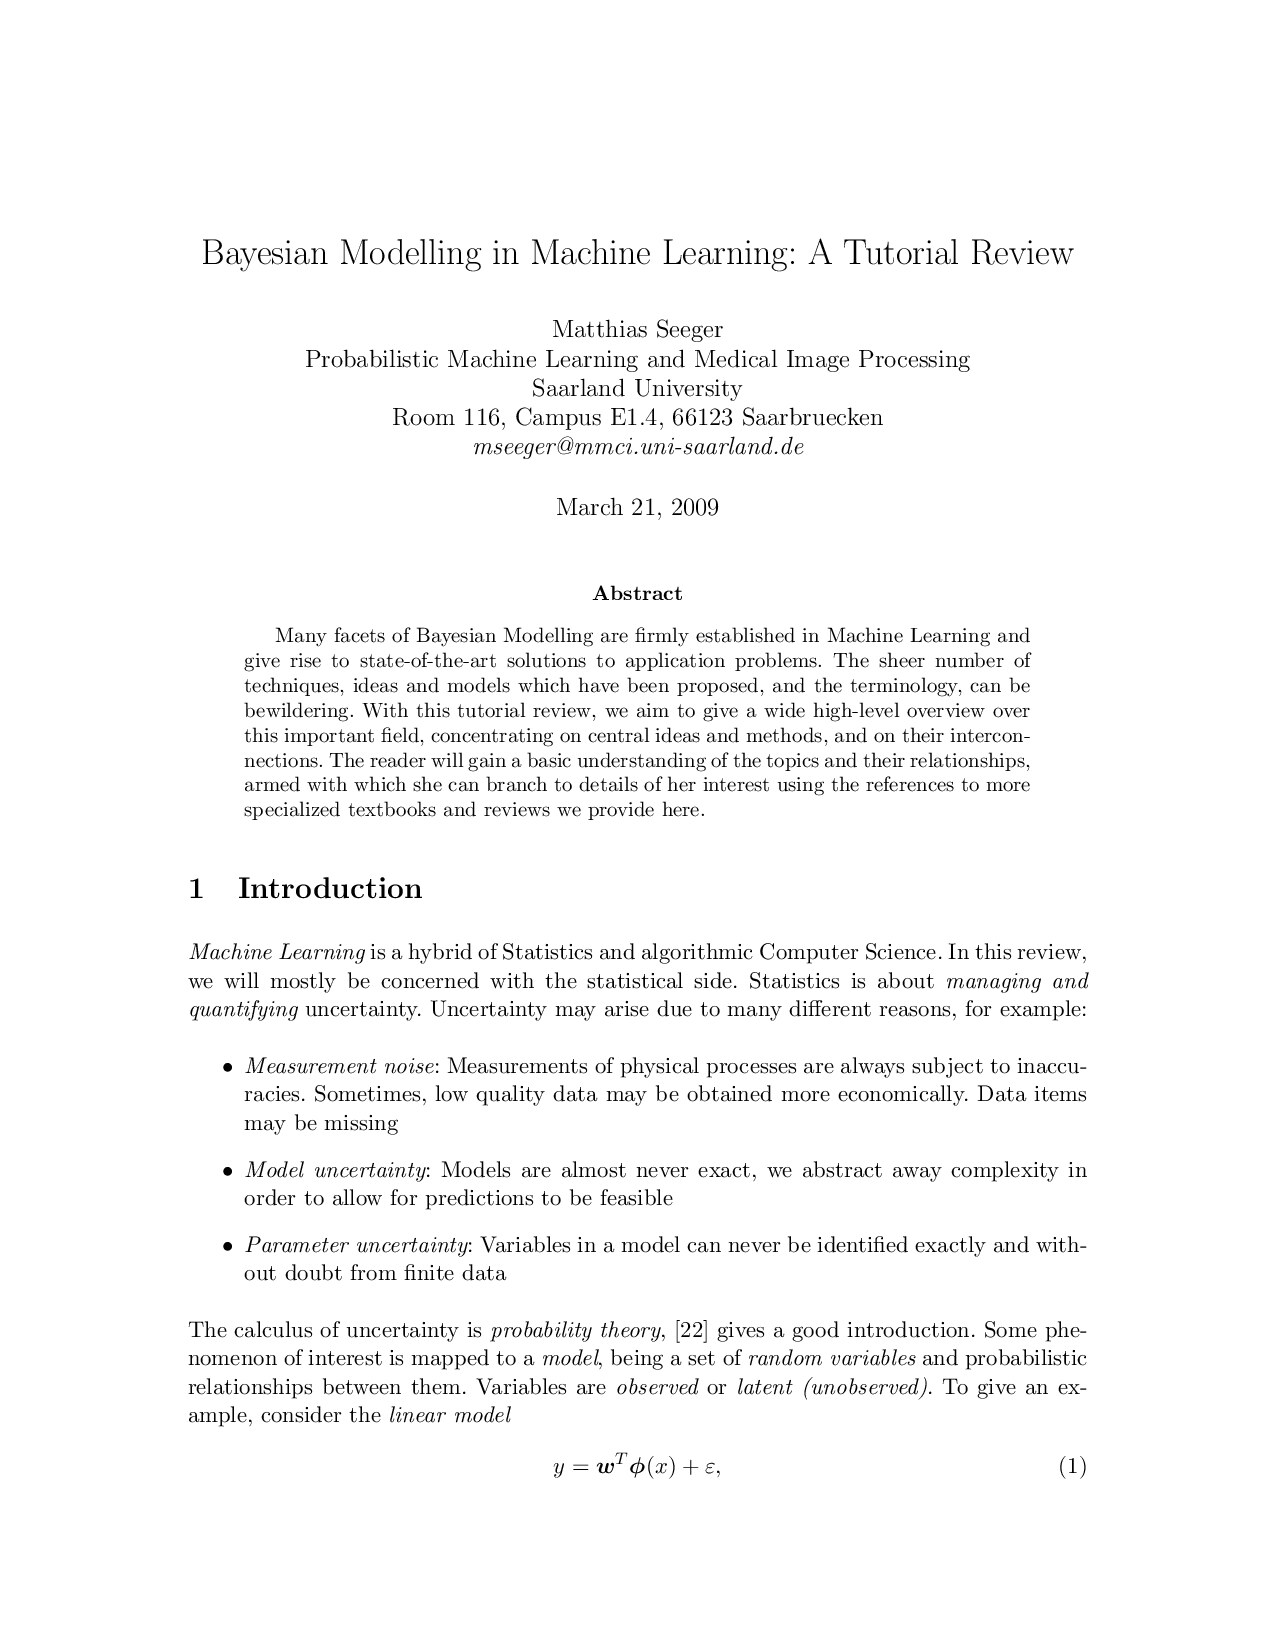 Bayesian Modelling in Machine Learning- A Tutorial Review